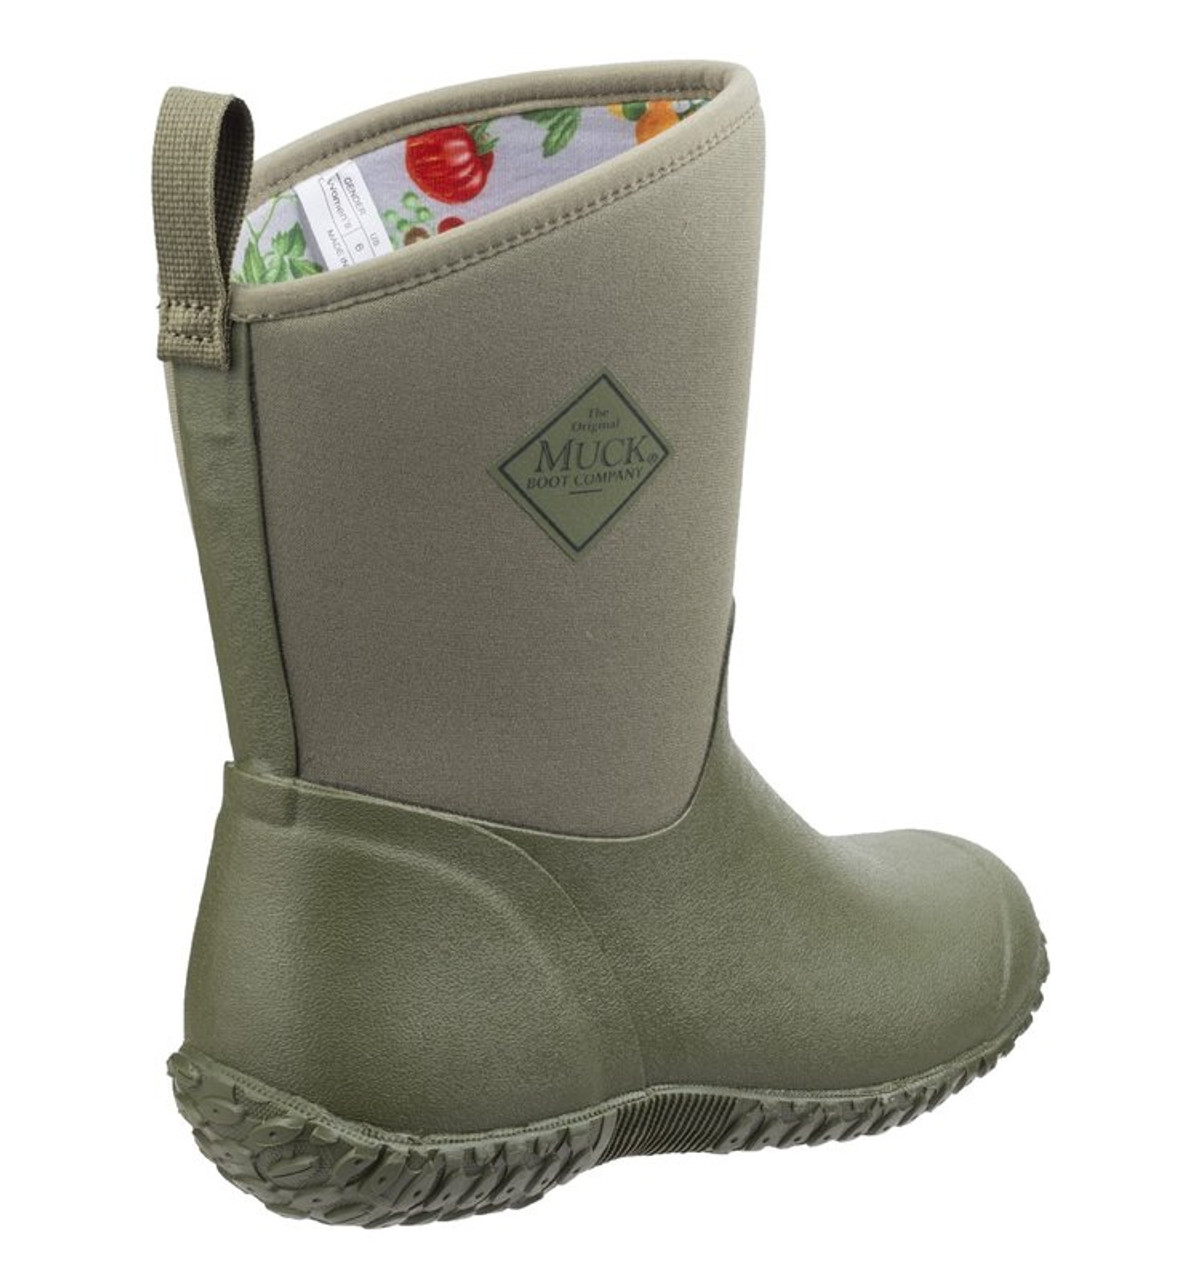 muck boots sale clearance